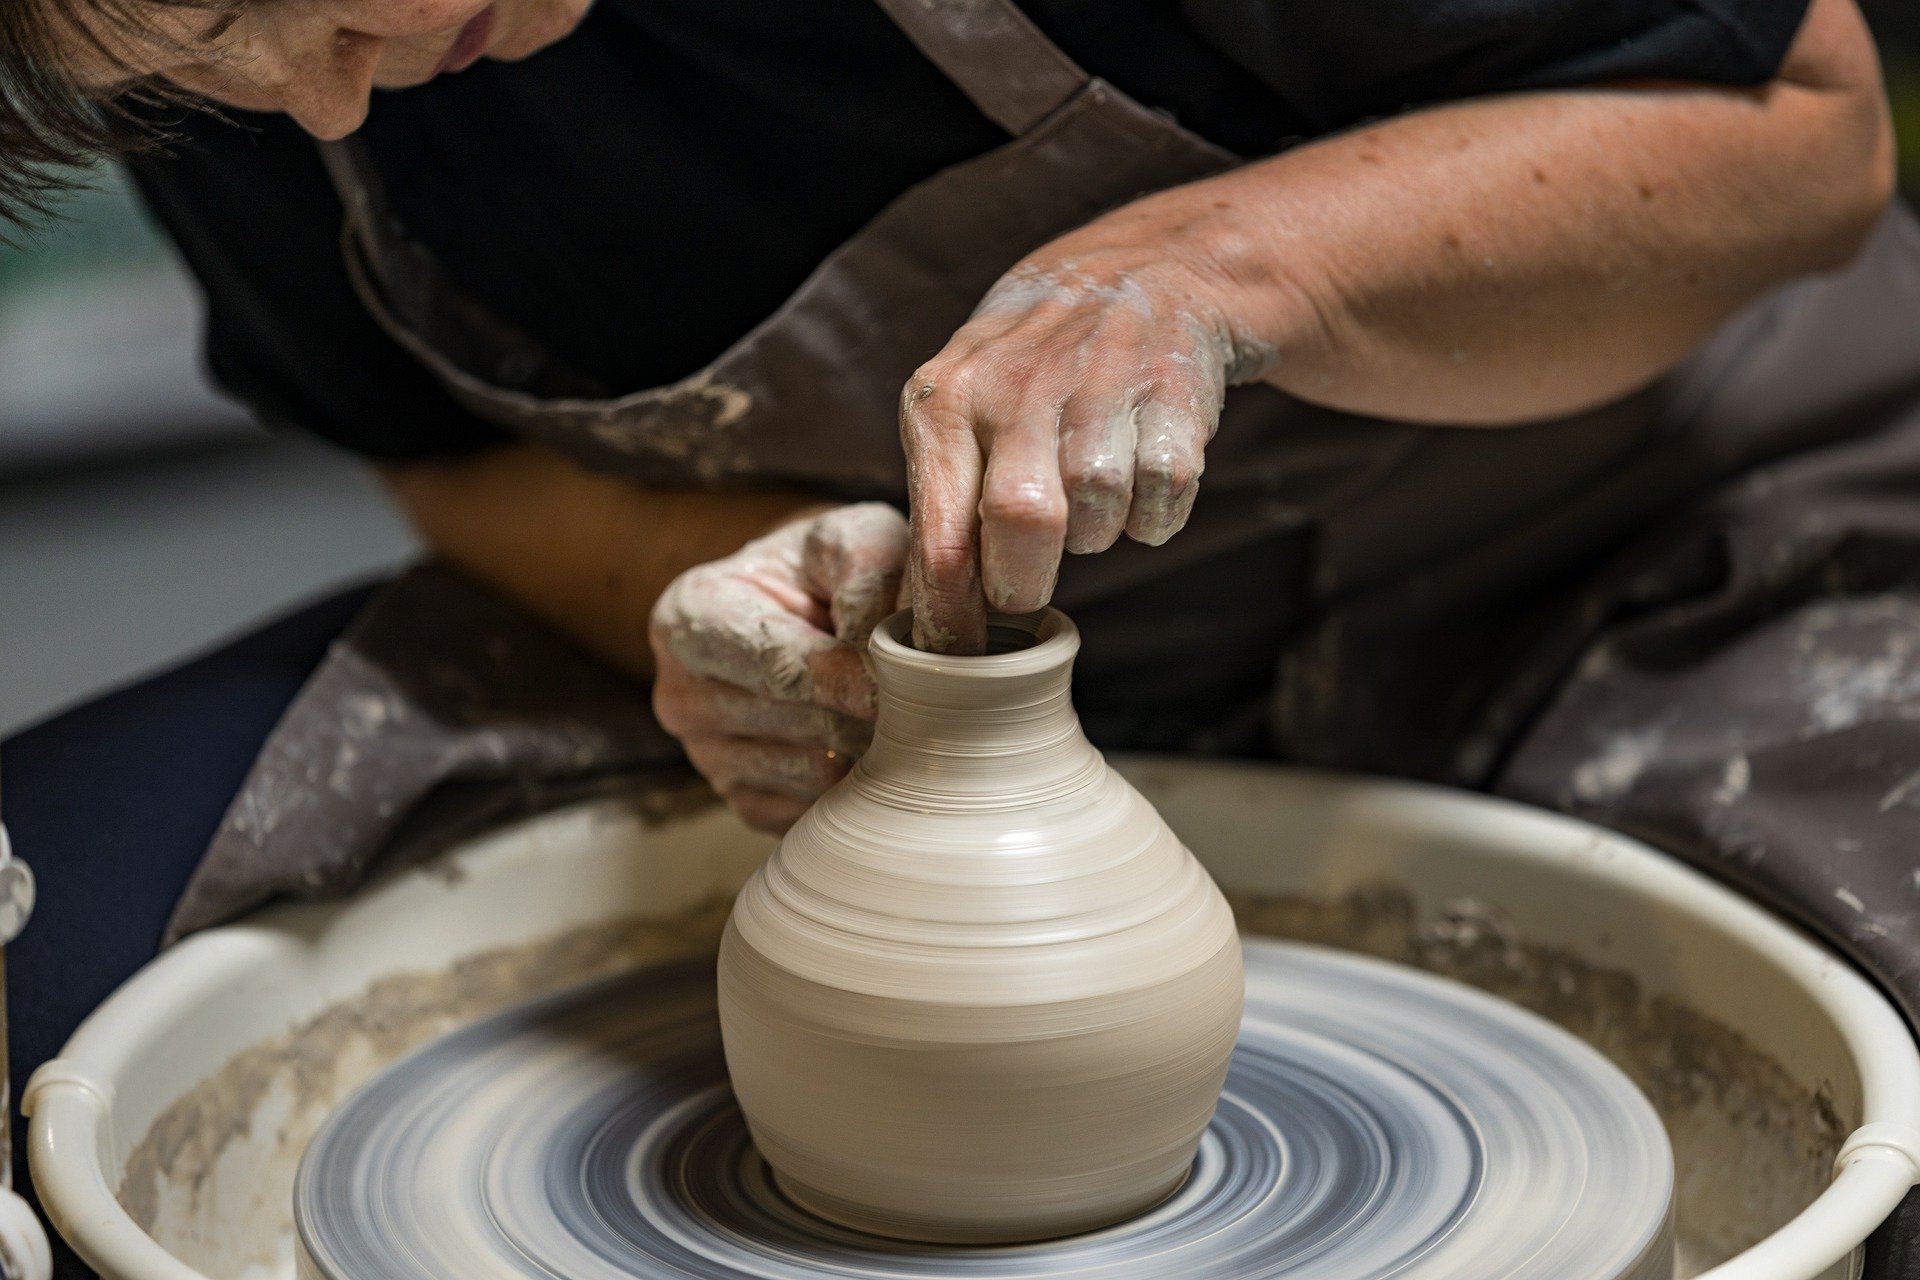 Guide to Ceramics: Types, Materials, & How-To Learn